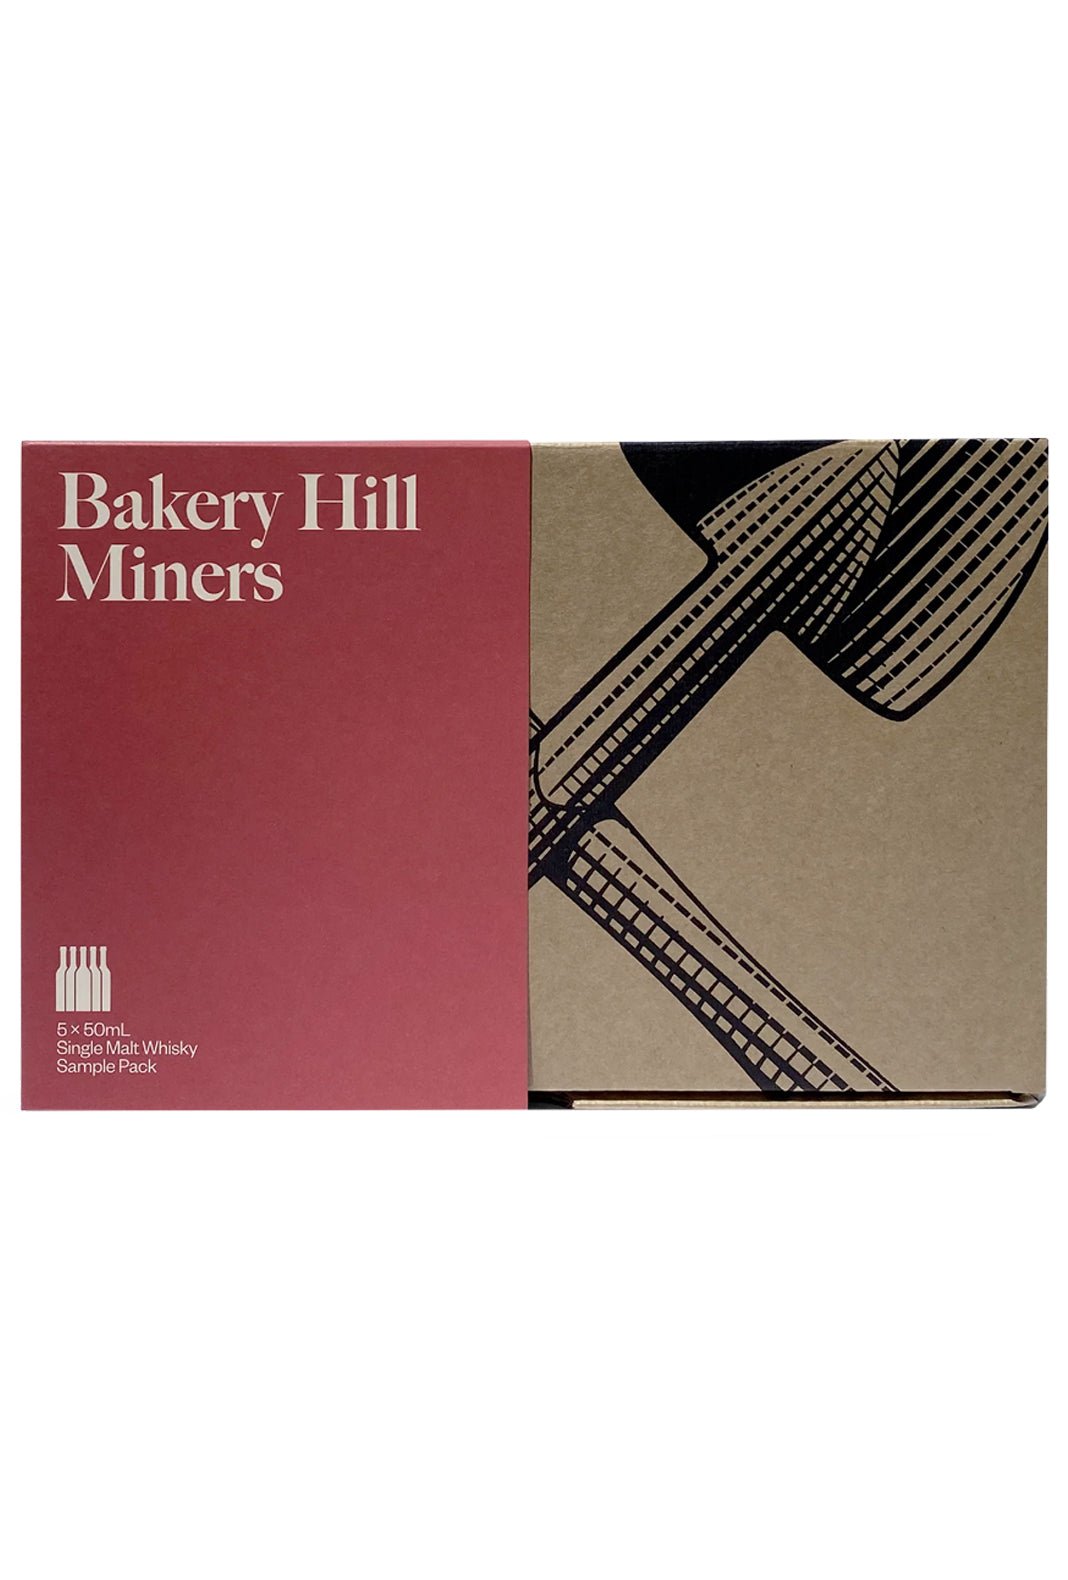 Bakery Hill Mini Whisky Gift Pack 5 x 50ml | Whisky | Shop online at Spirits of France